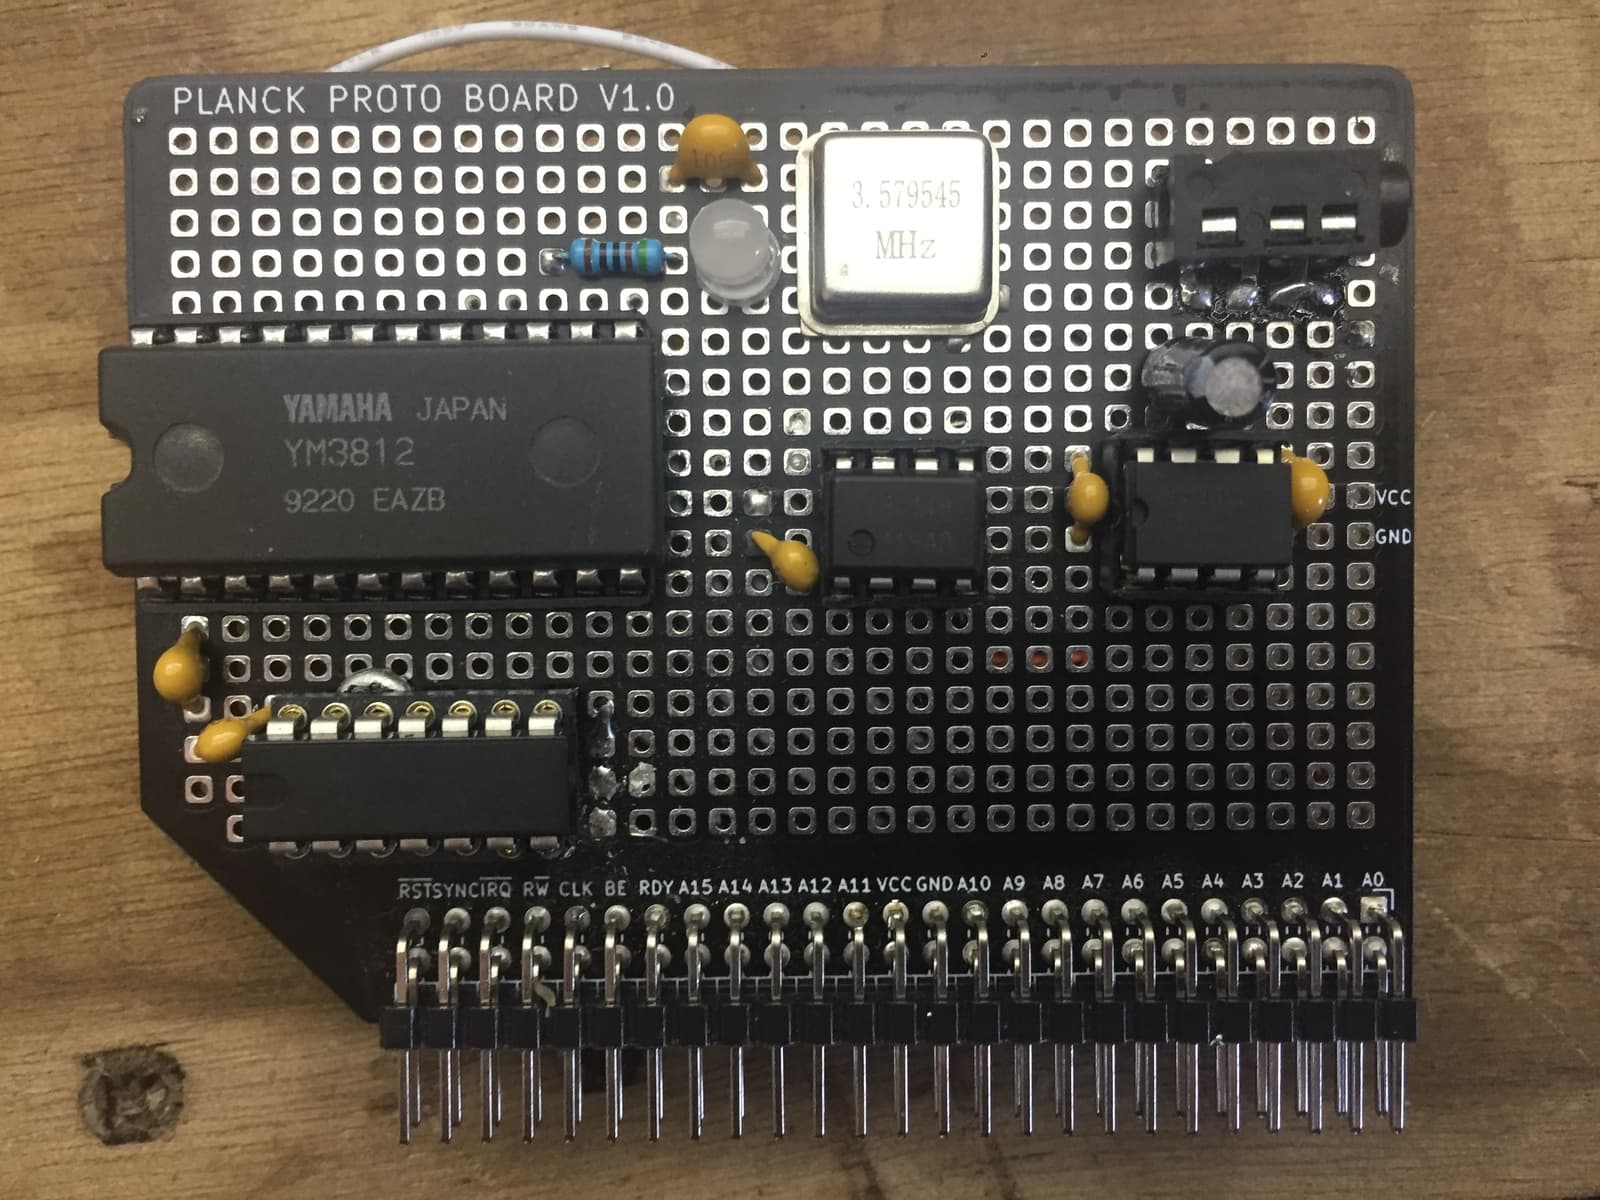 Planck prototype board for LCD